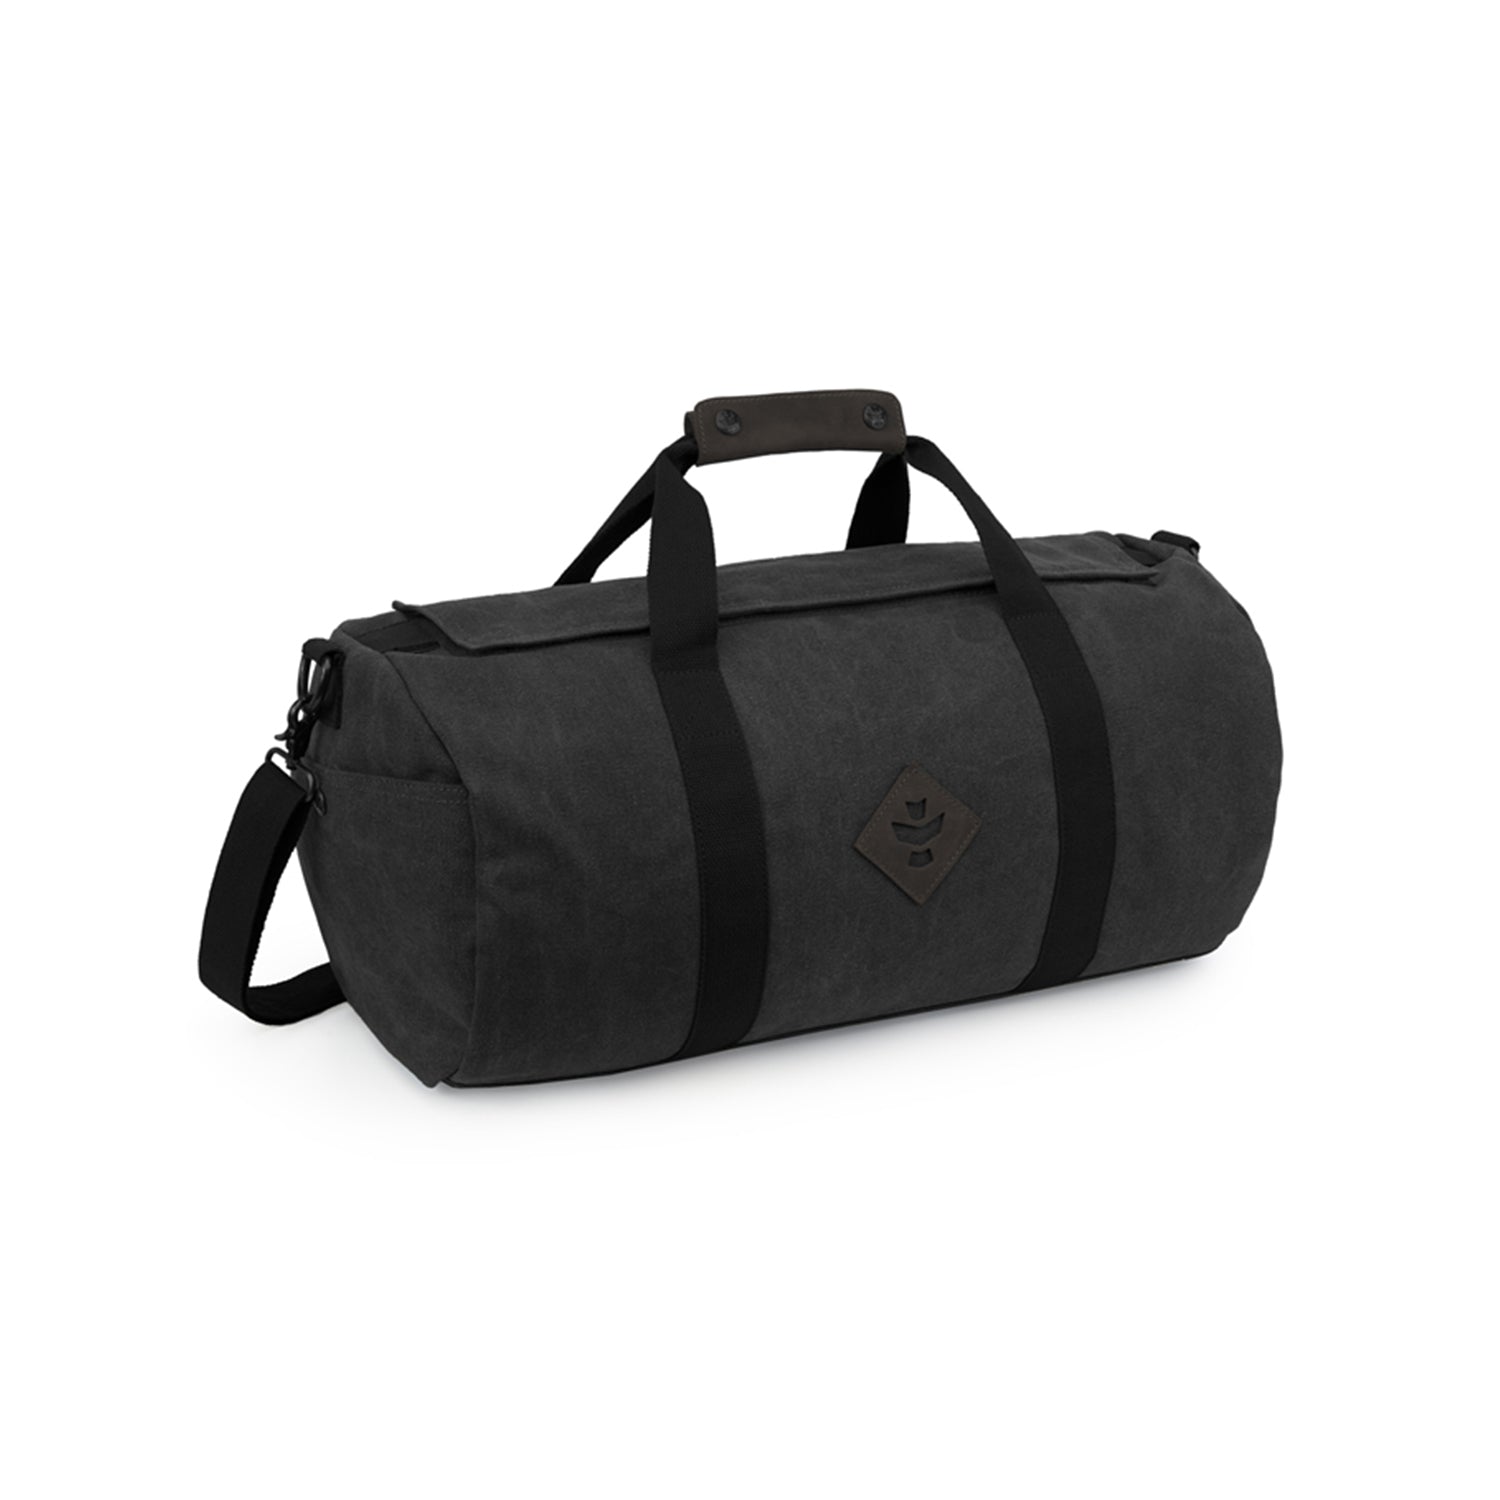 Revelry Overnighter - Smell Proof Small Duffle